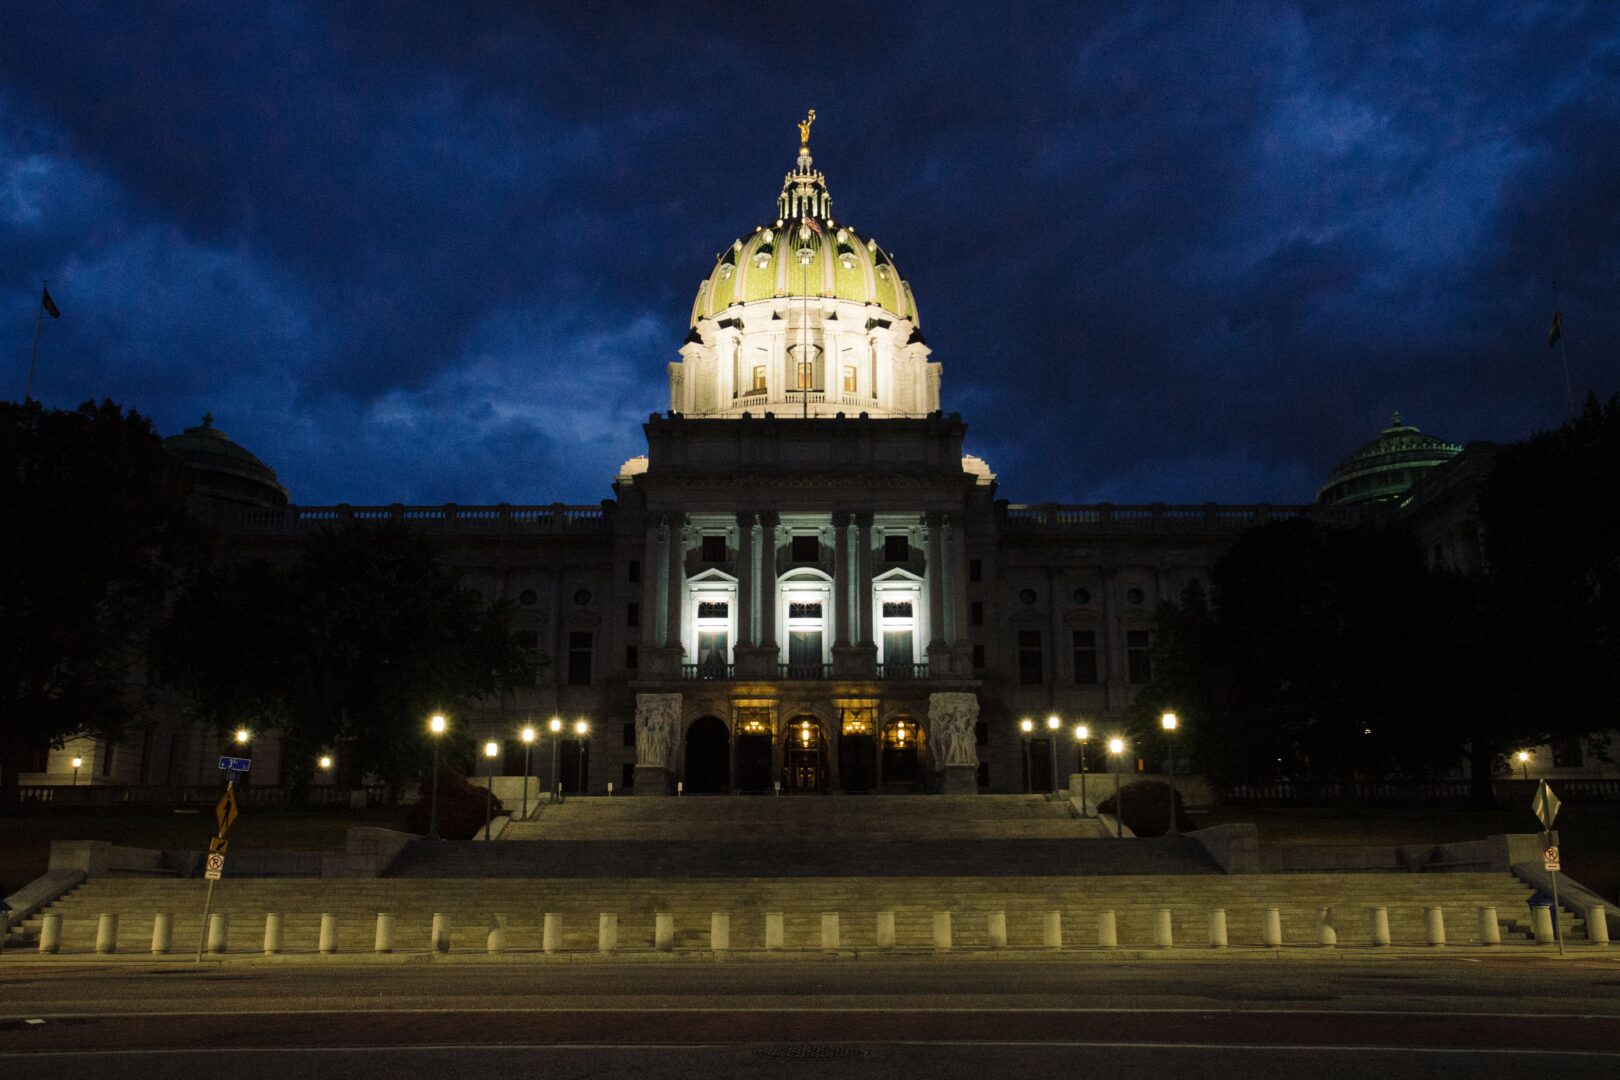 View of the south side of the Pennsylvania State Capitol Complex at night.